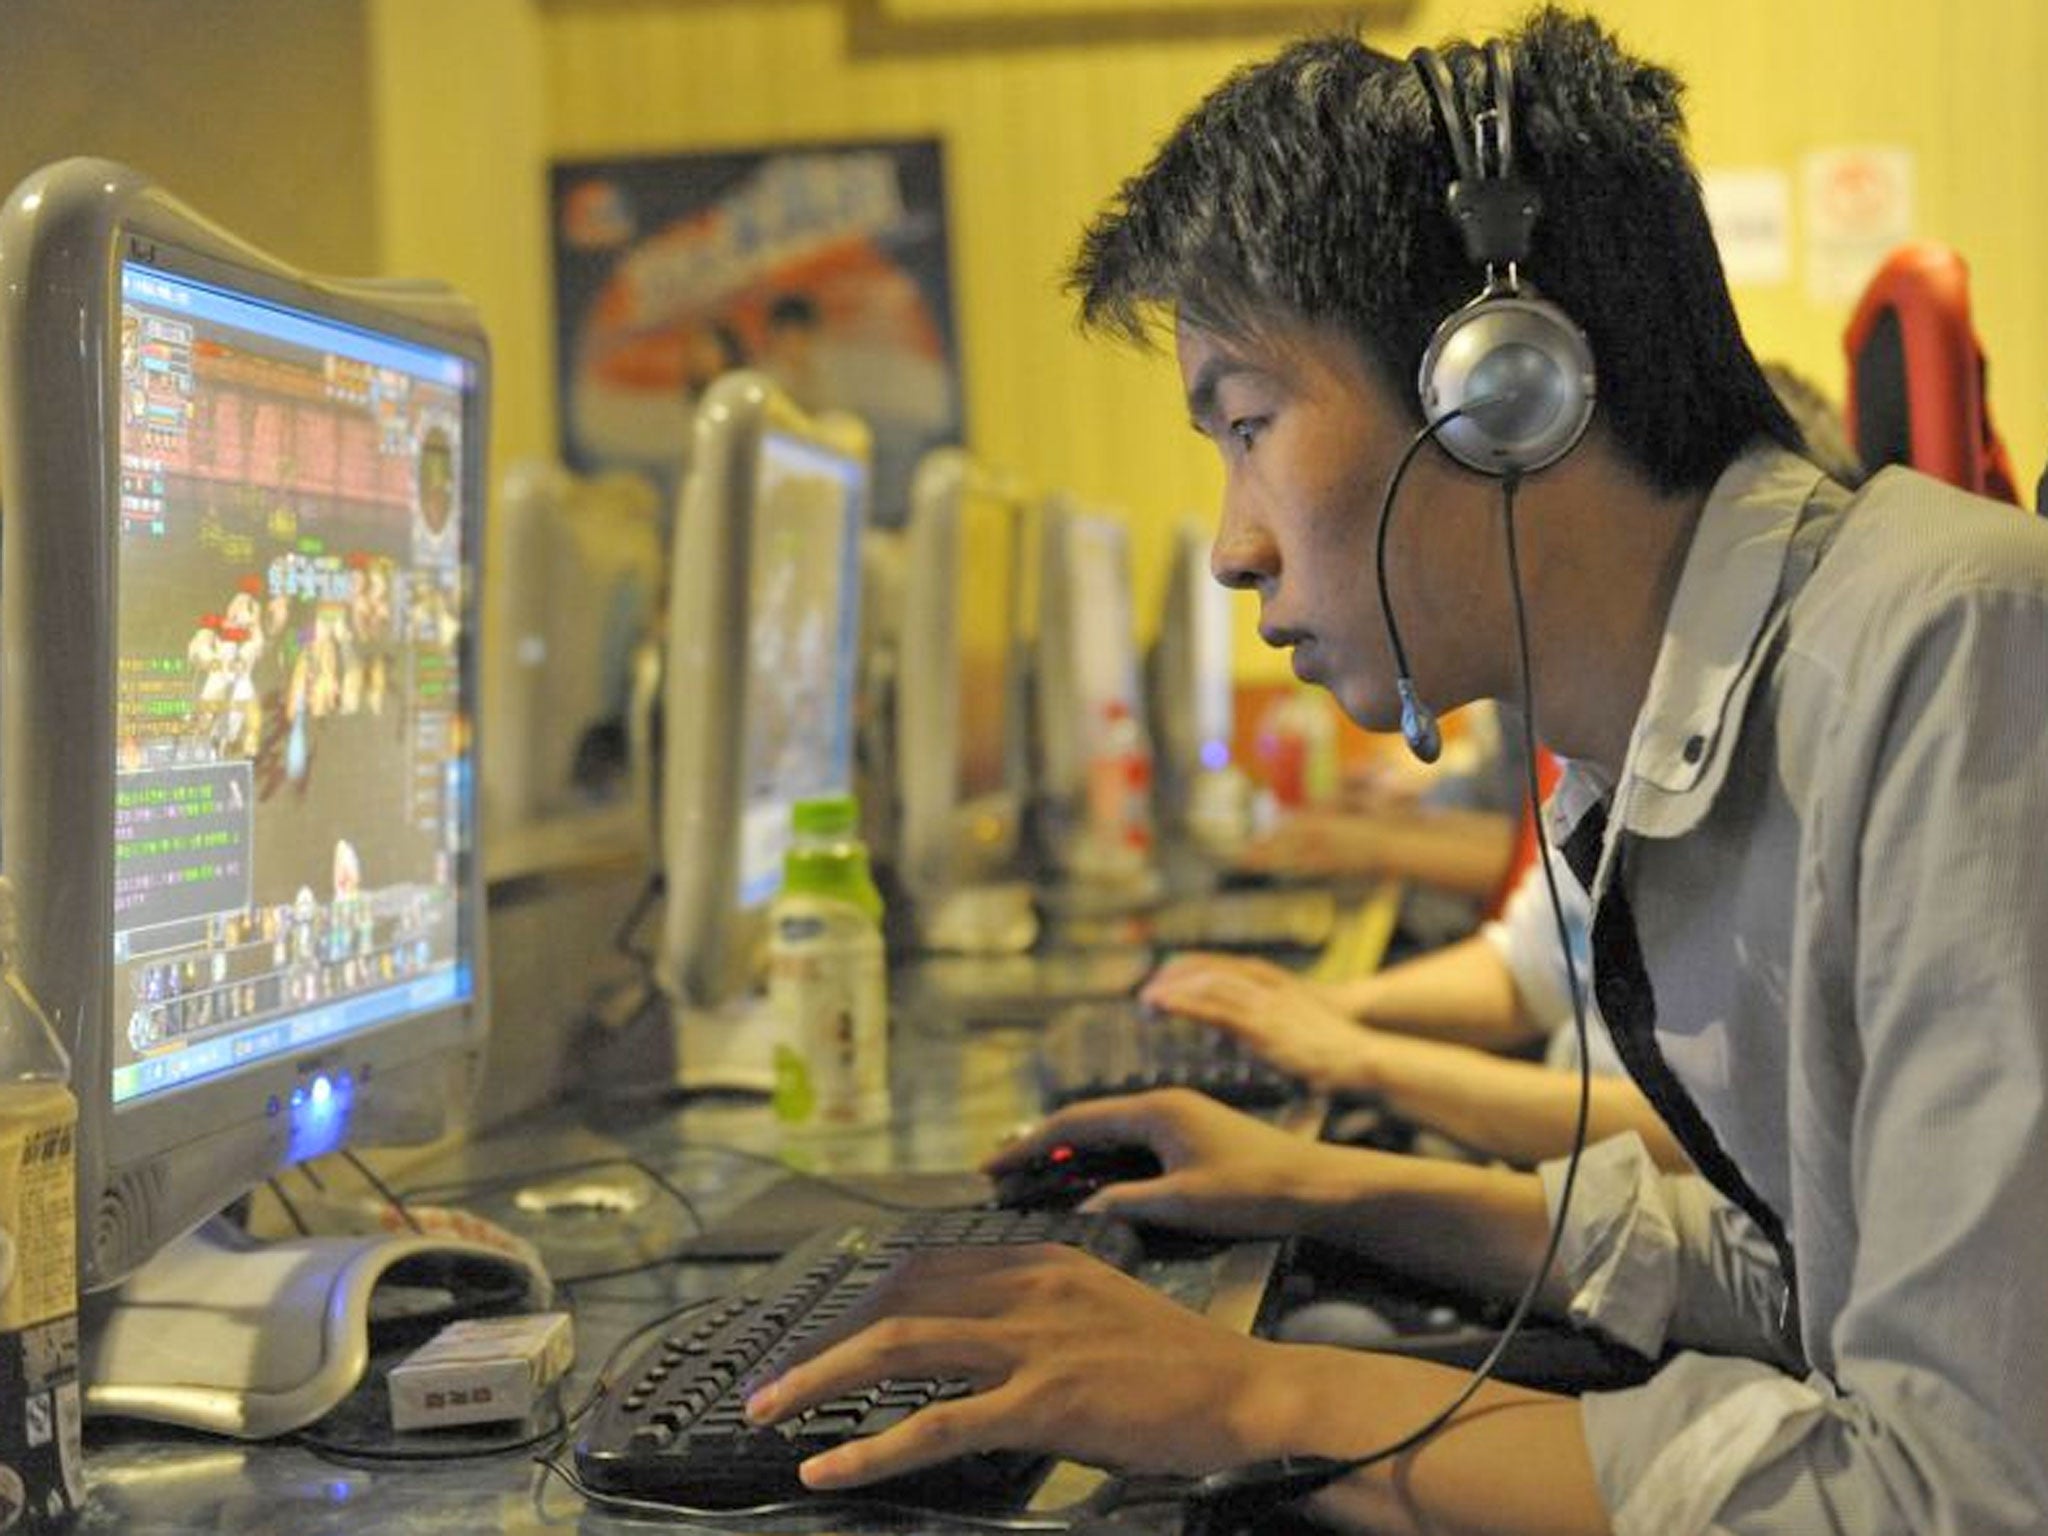 Time to monitor games children play online - Chinadaily.com.cn